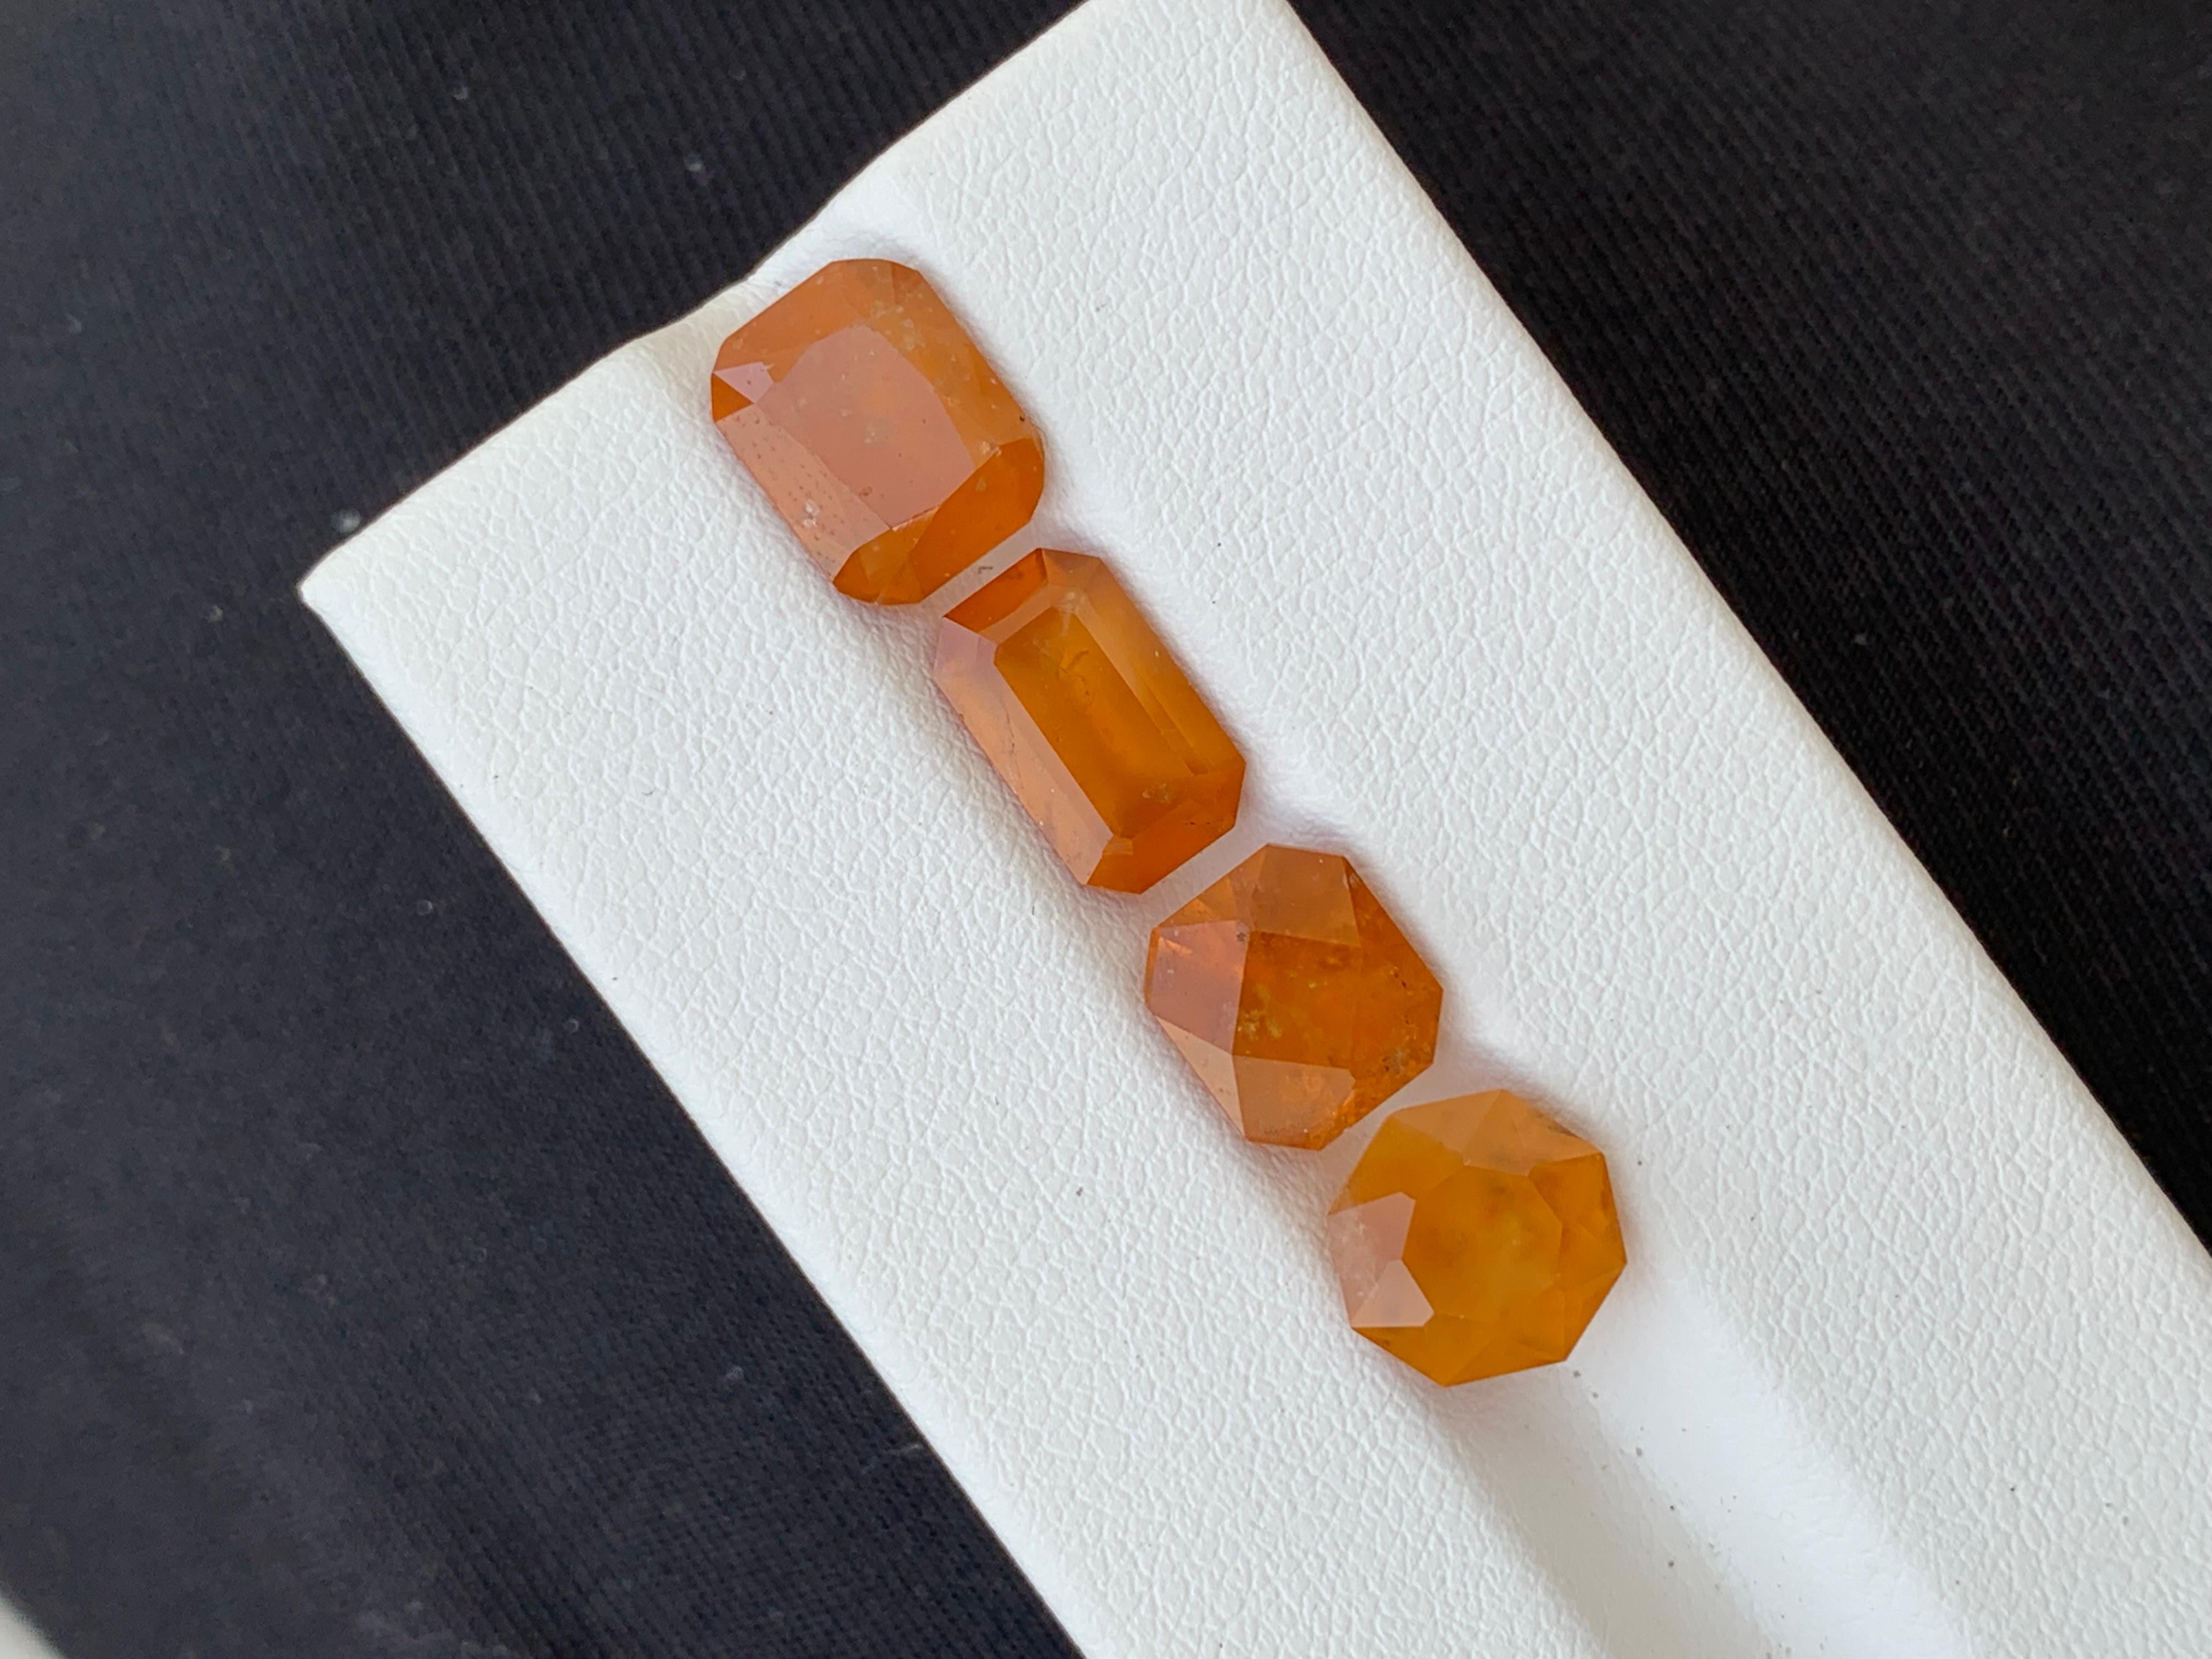  12.40 Carats Fanta Natural Loose Hessonite Smoky Garnet Lot For Jewelry Making For Sale 4